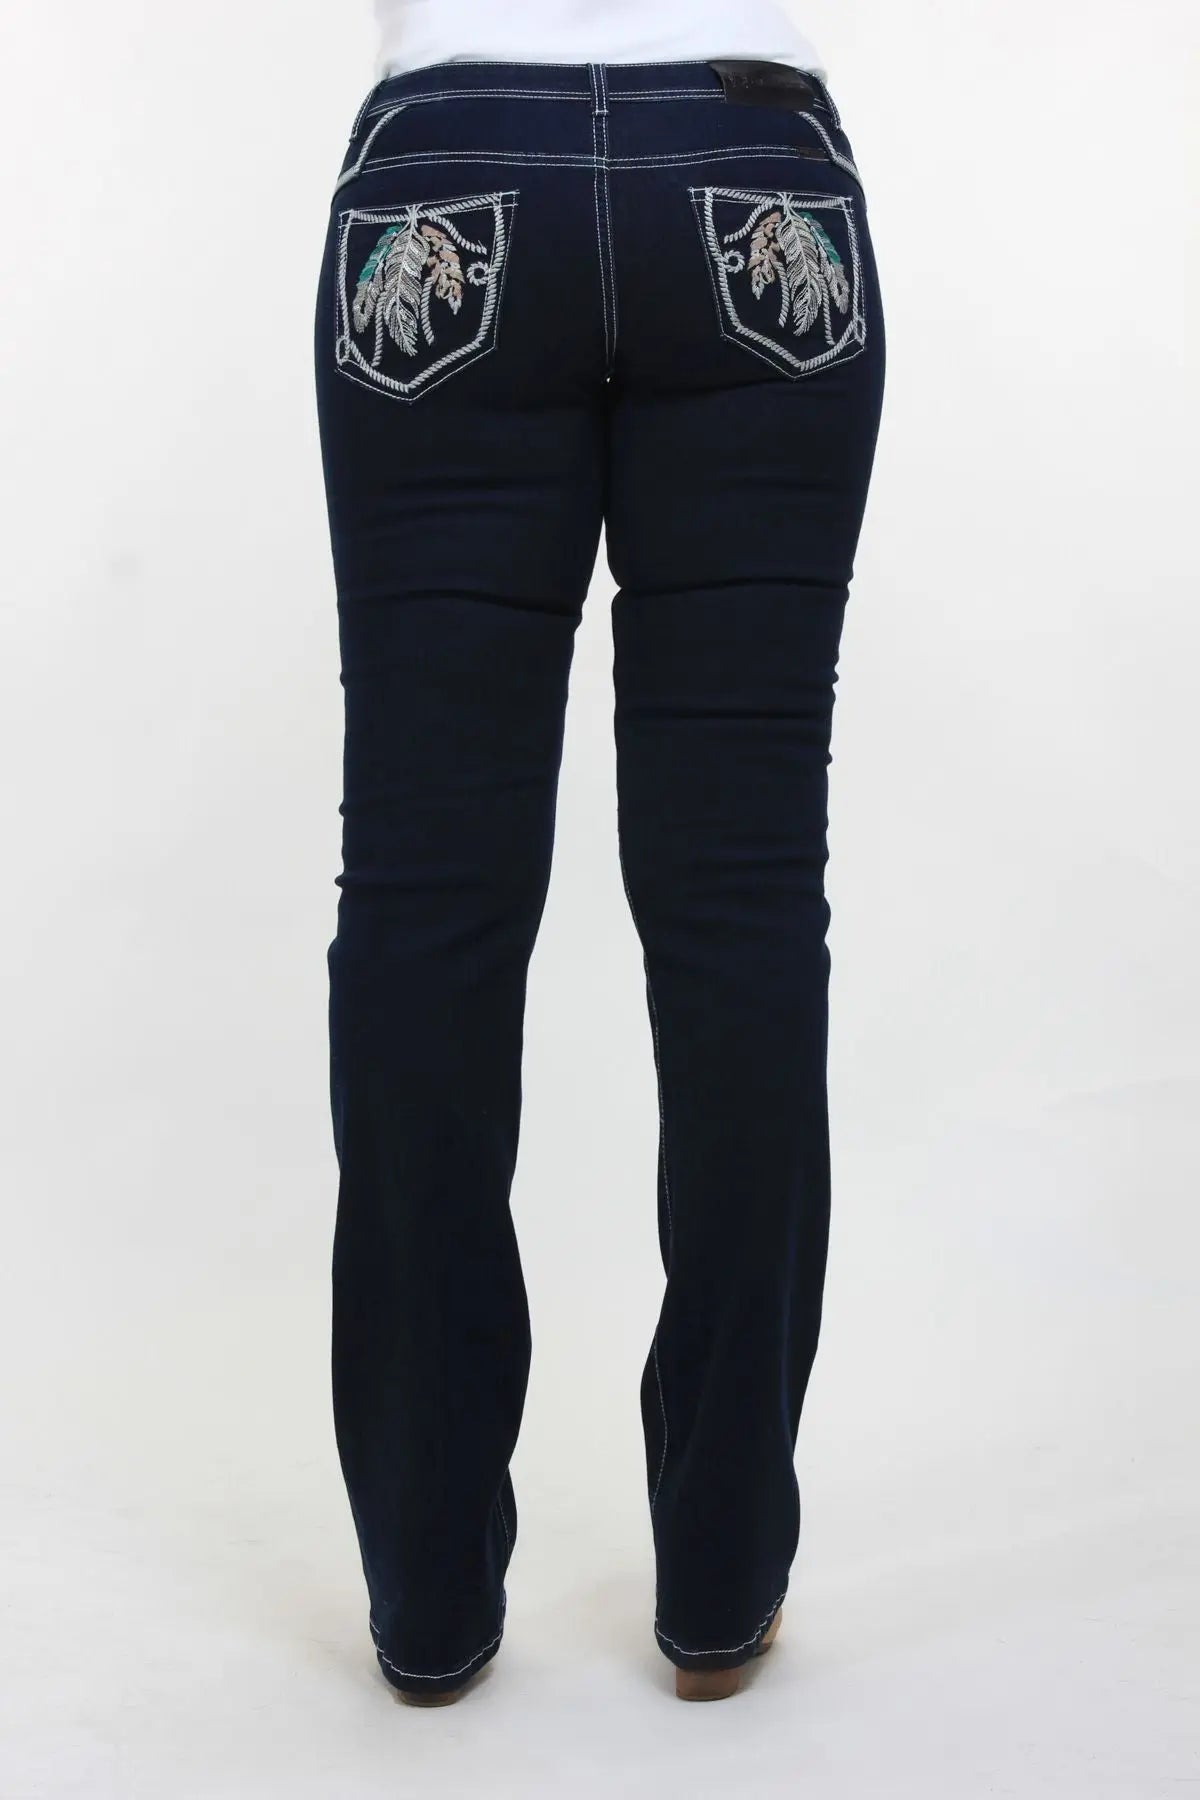 Becky Bling Jeans Classic Dark Wash Outback Supply Co